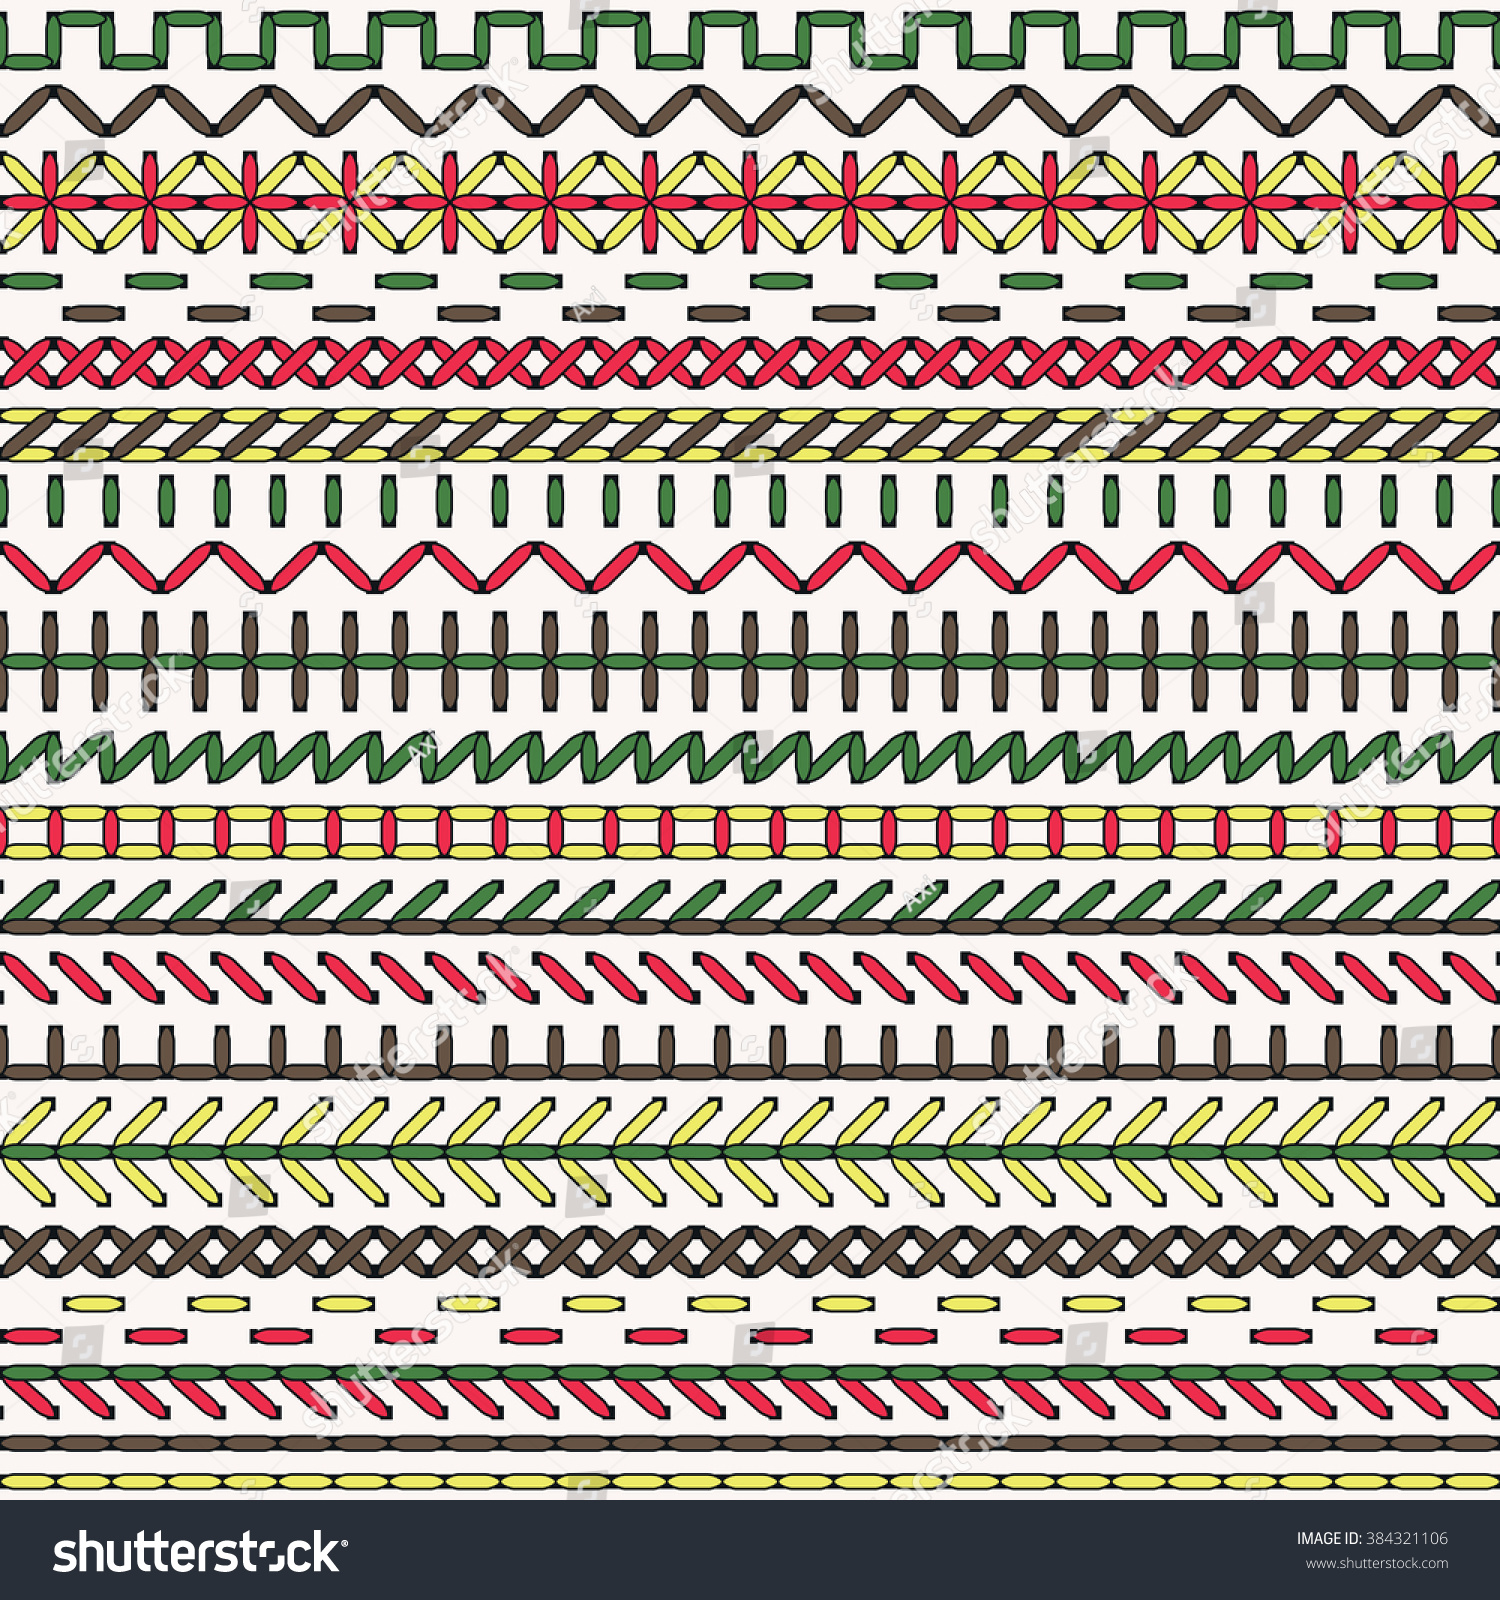 Vector Stitch Seamless Pattern. Embroidery Borders. Sewing Elements ...